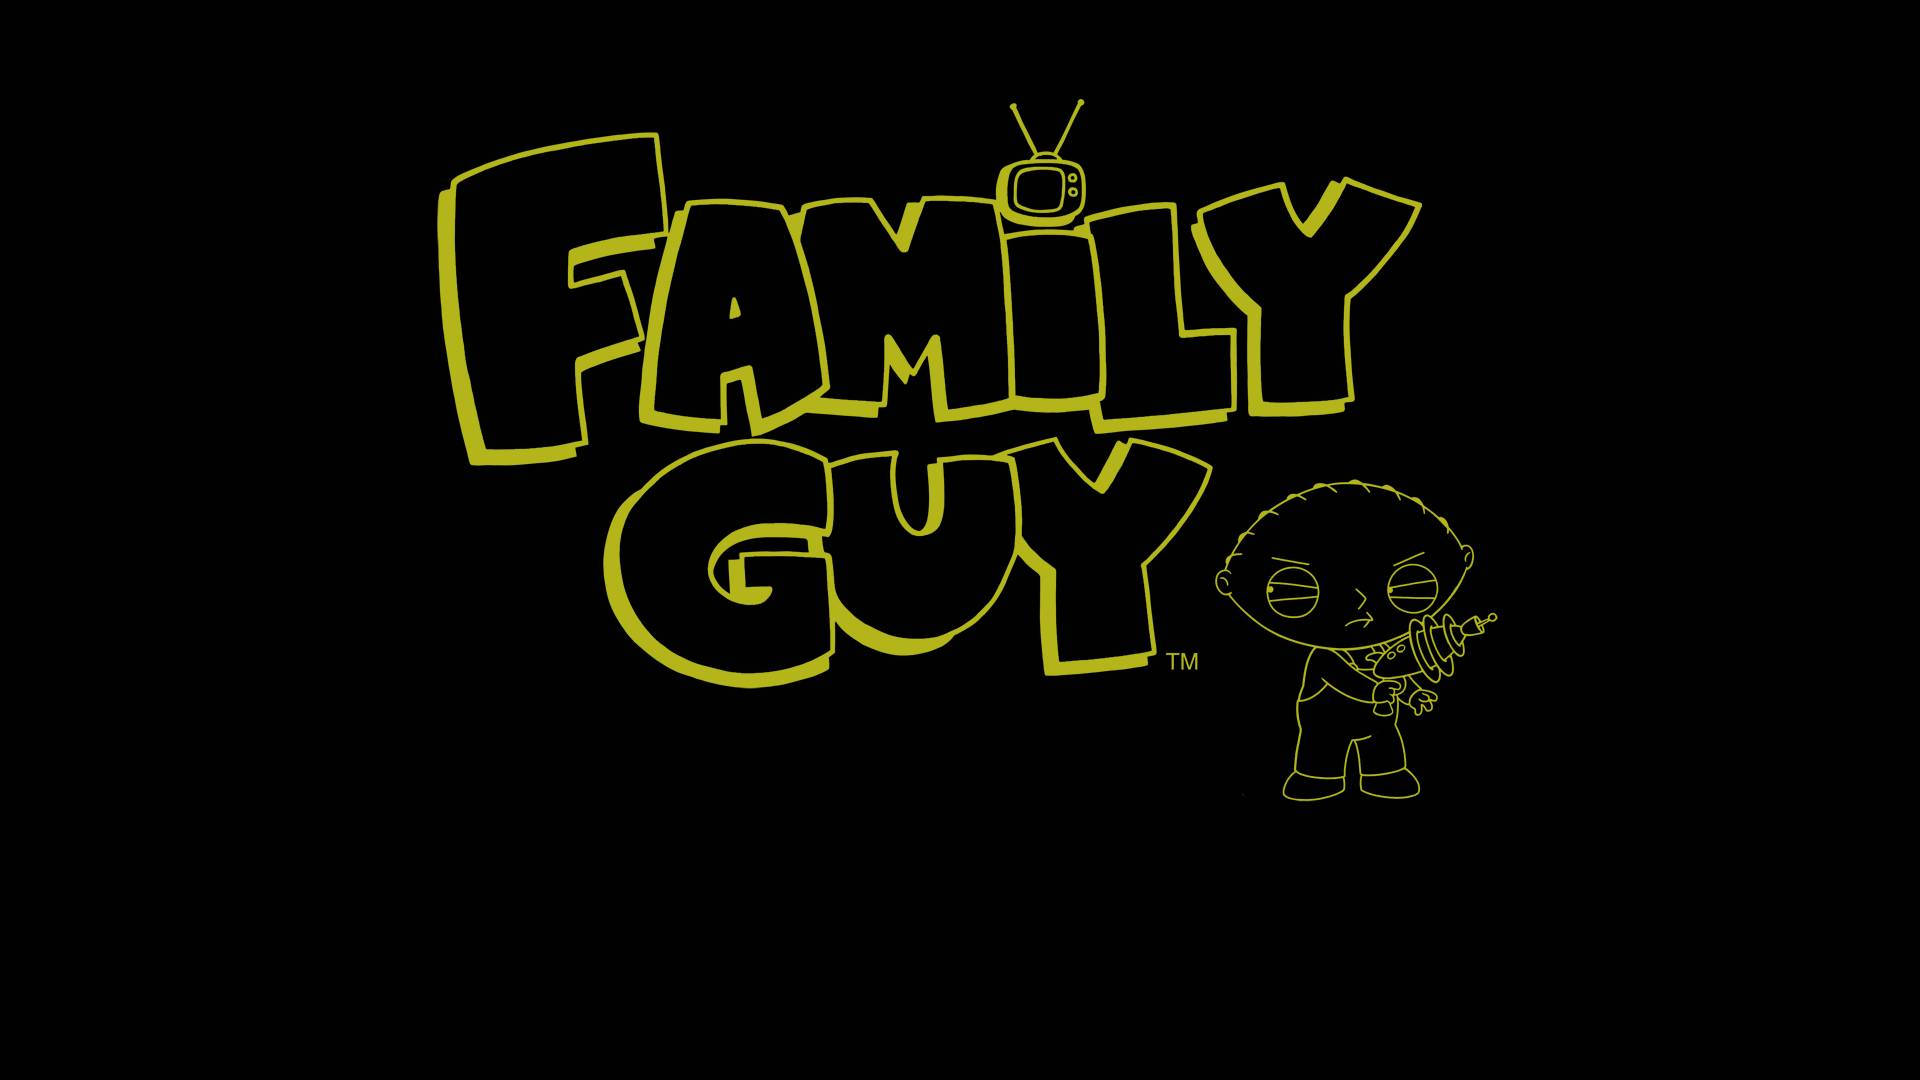 Family Guy Stewie Griffin Poster Wallpaper